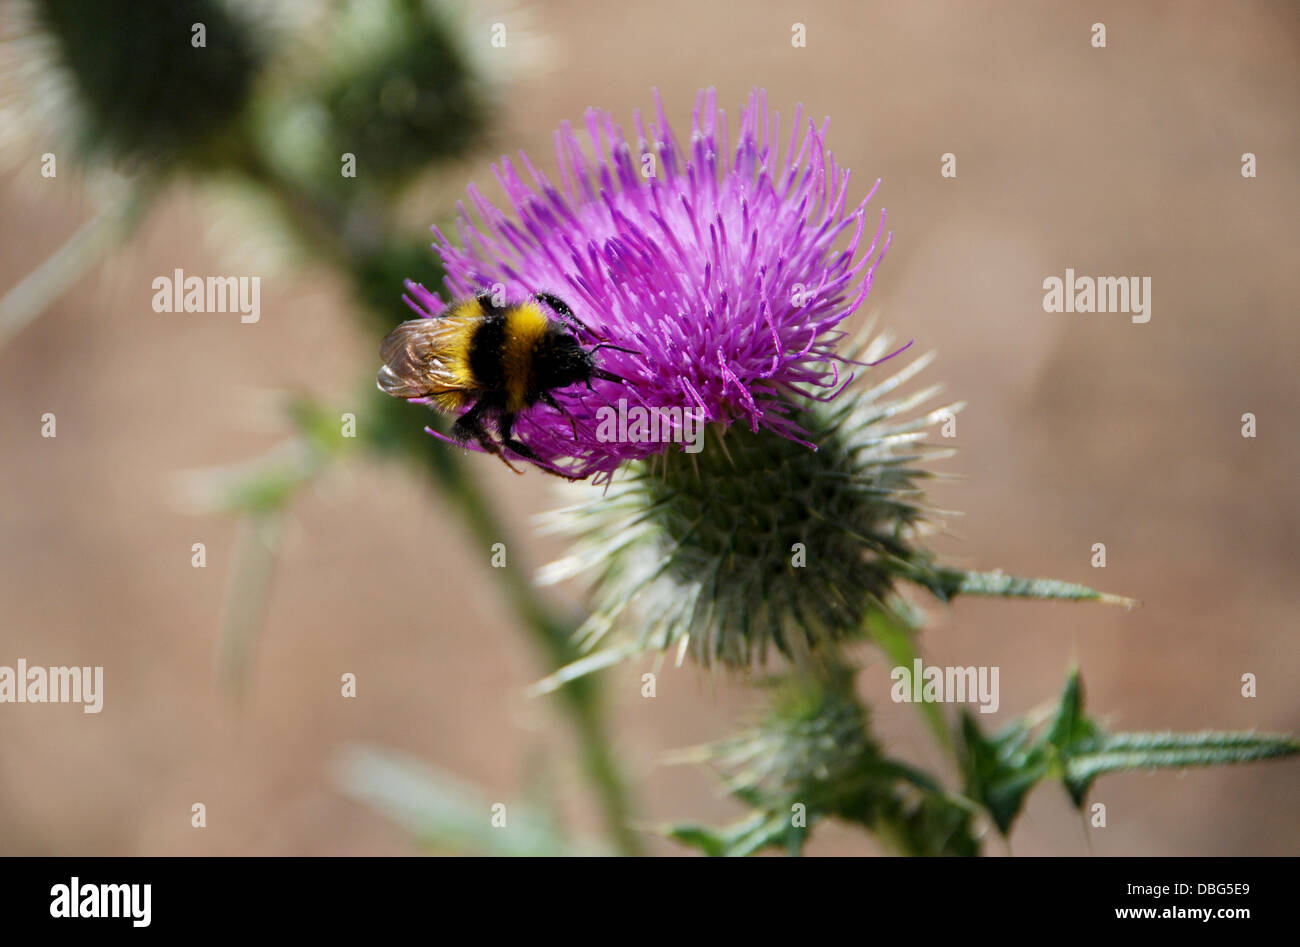 Bumble bee searching for nectar on a thistle, the Scottish national flower Stock Photo